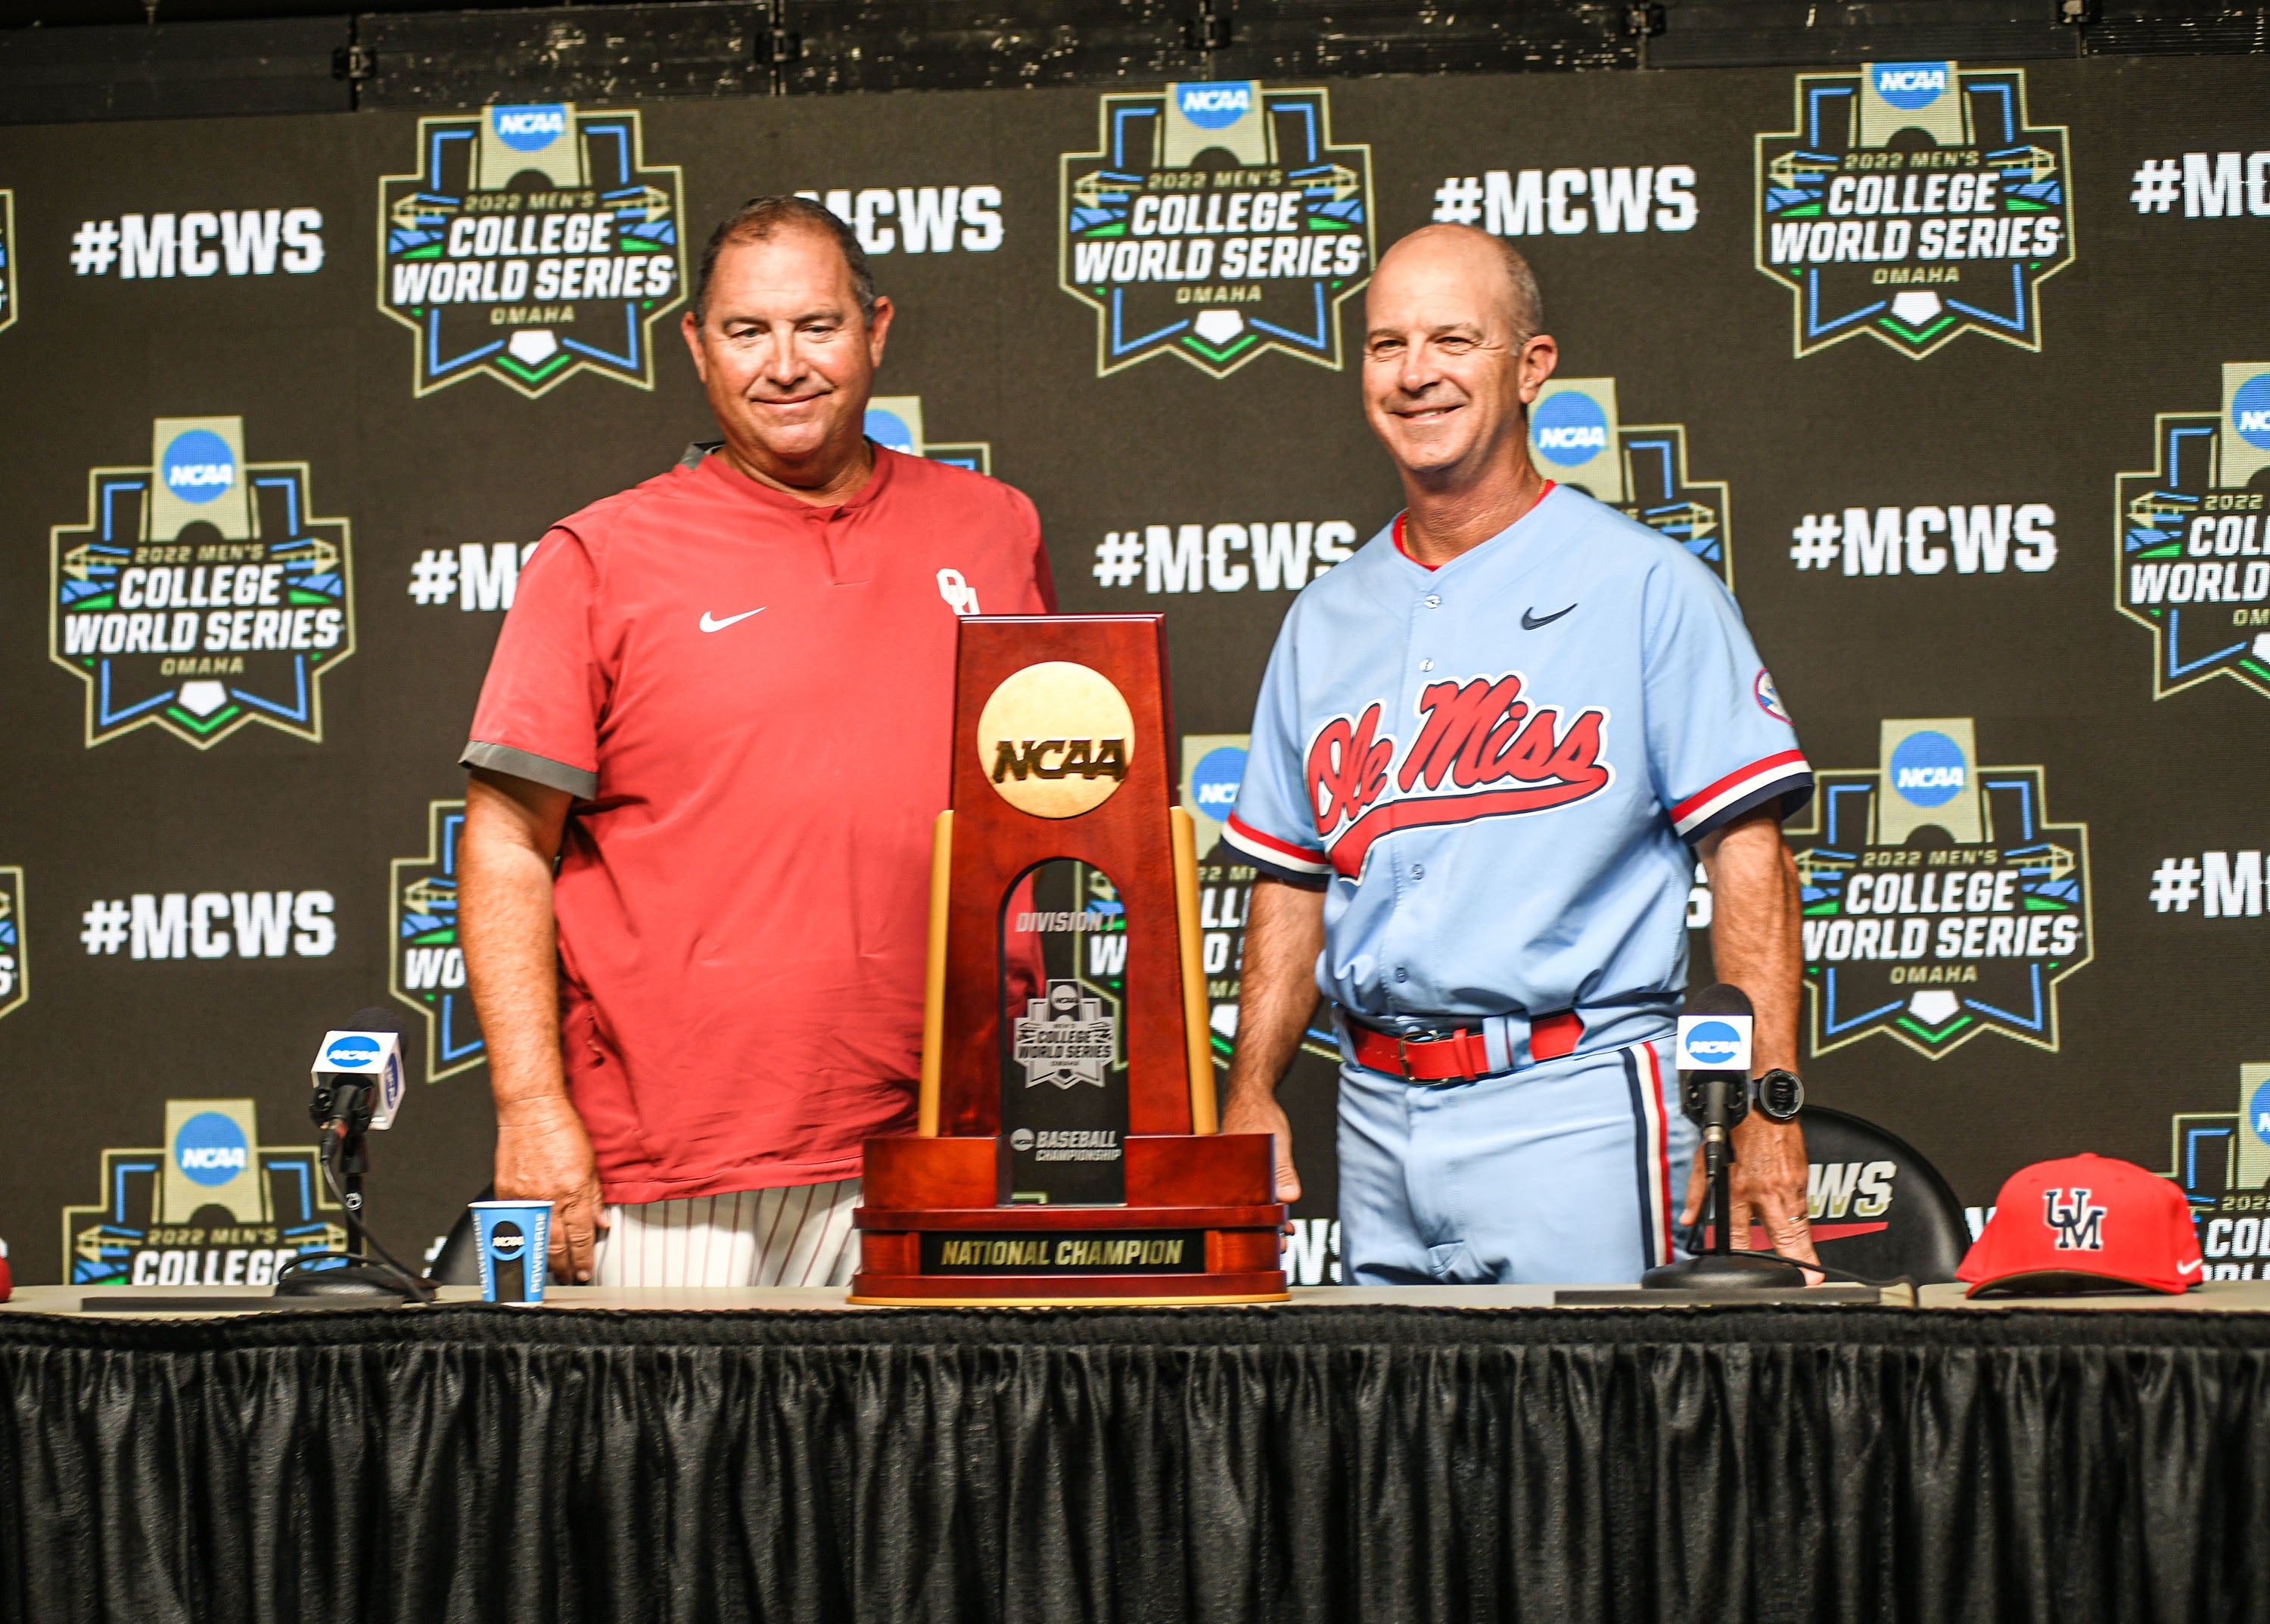 Gallery Ole Miss Holds Cws Championship Press Conference The Oxford Eagle The Oxford Eagle